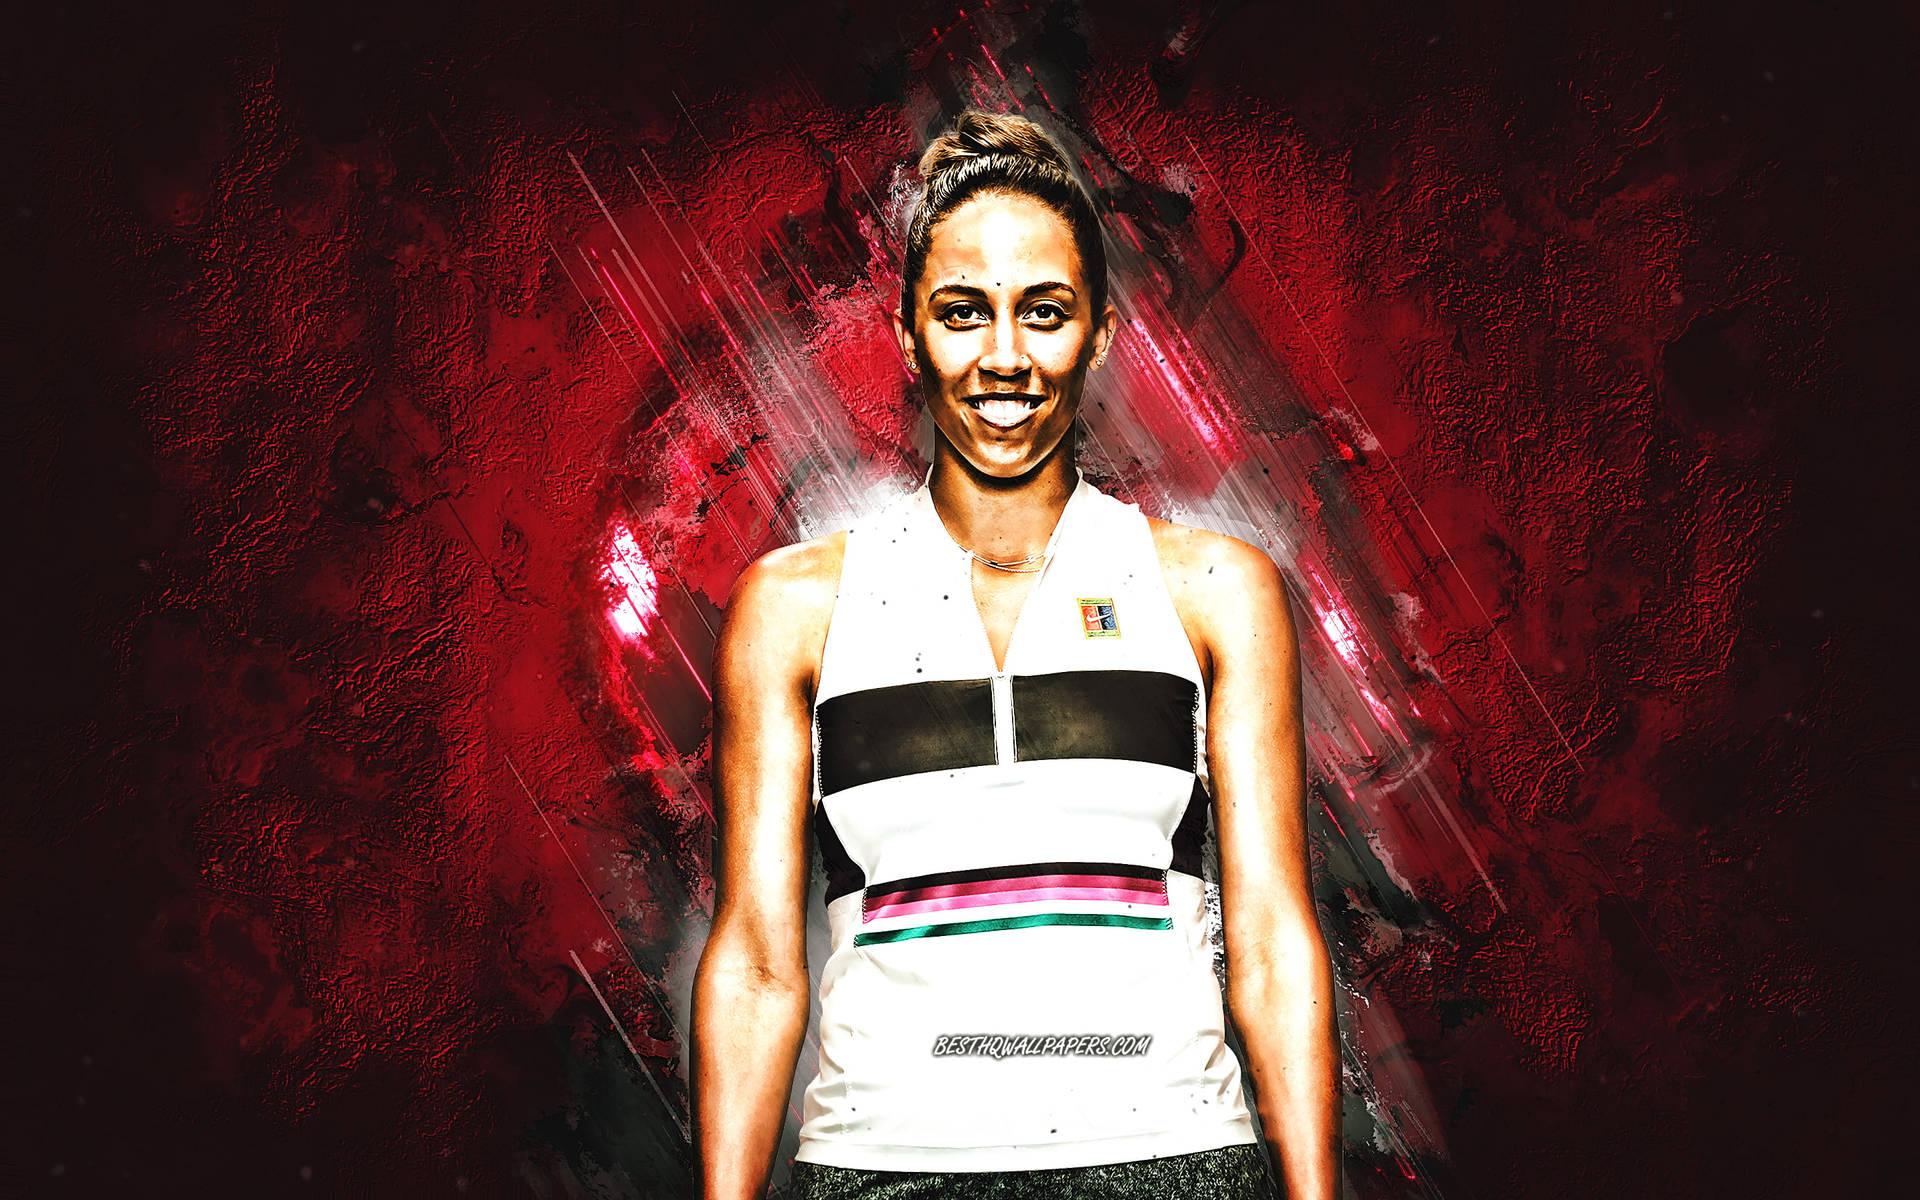 Madison Keys In Action During A Tennis Match Wallpaper